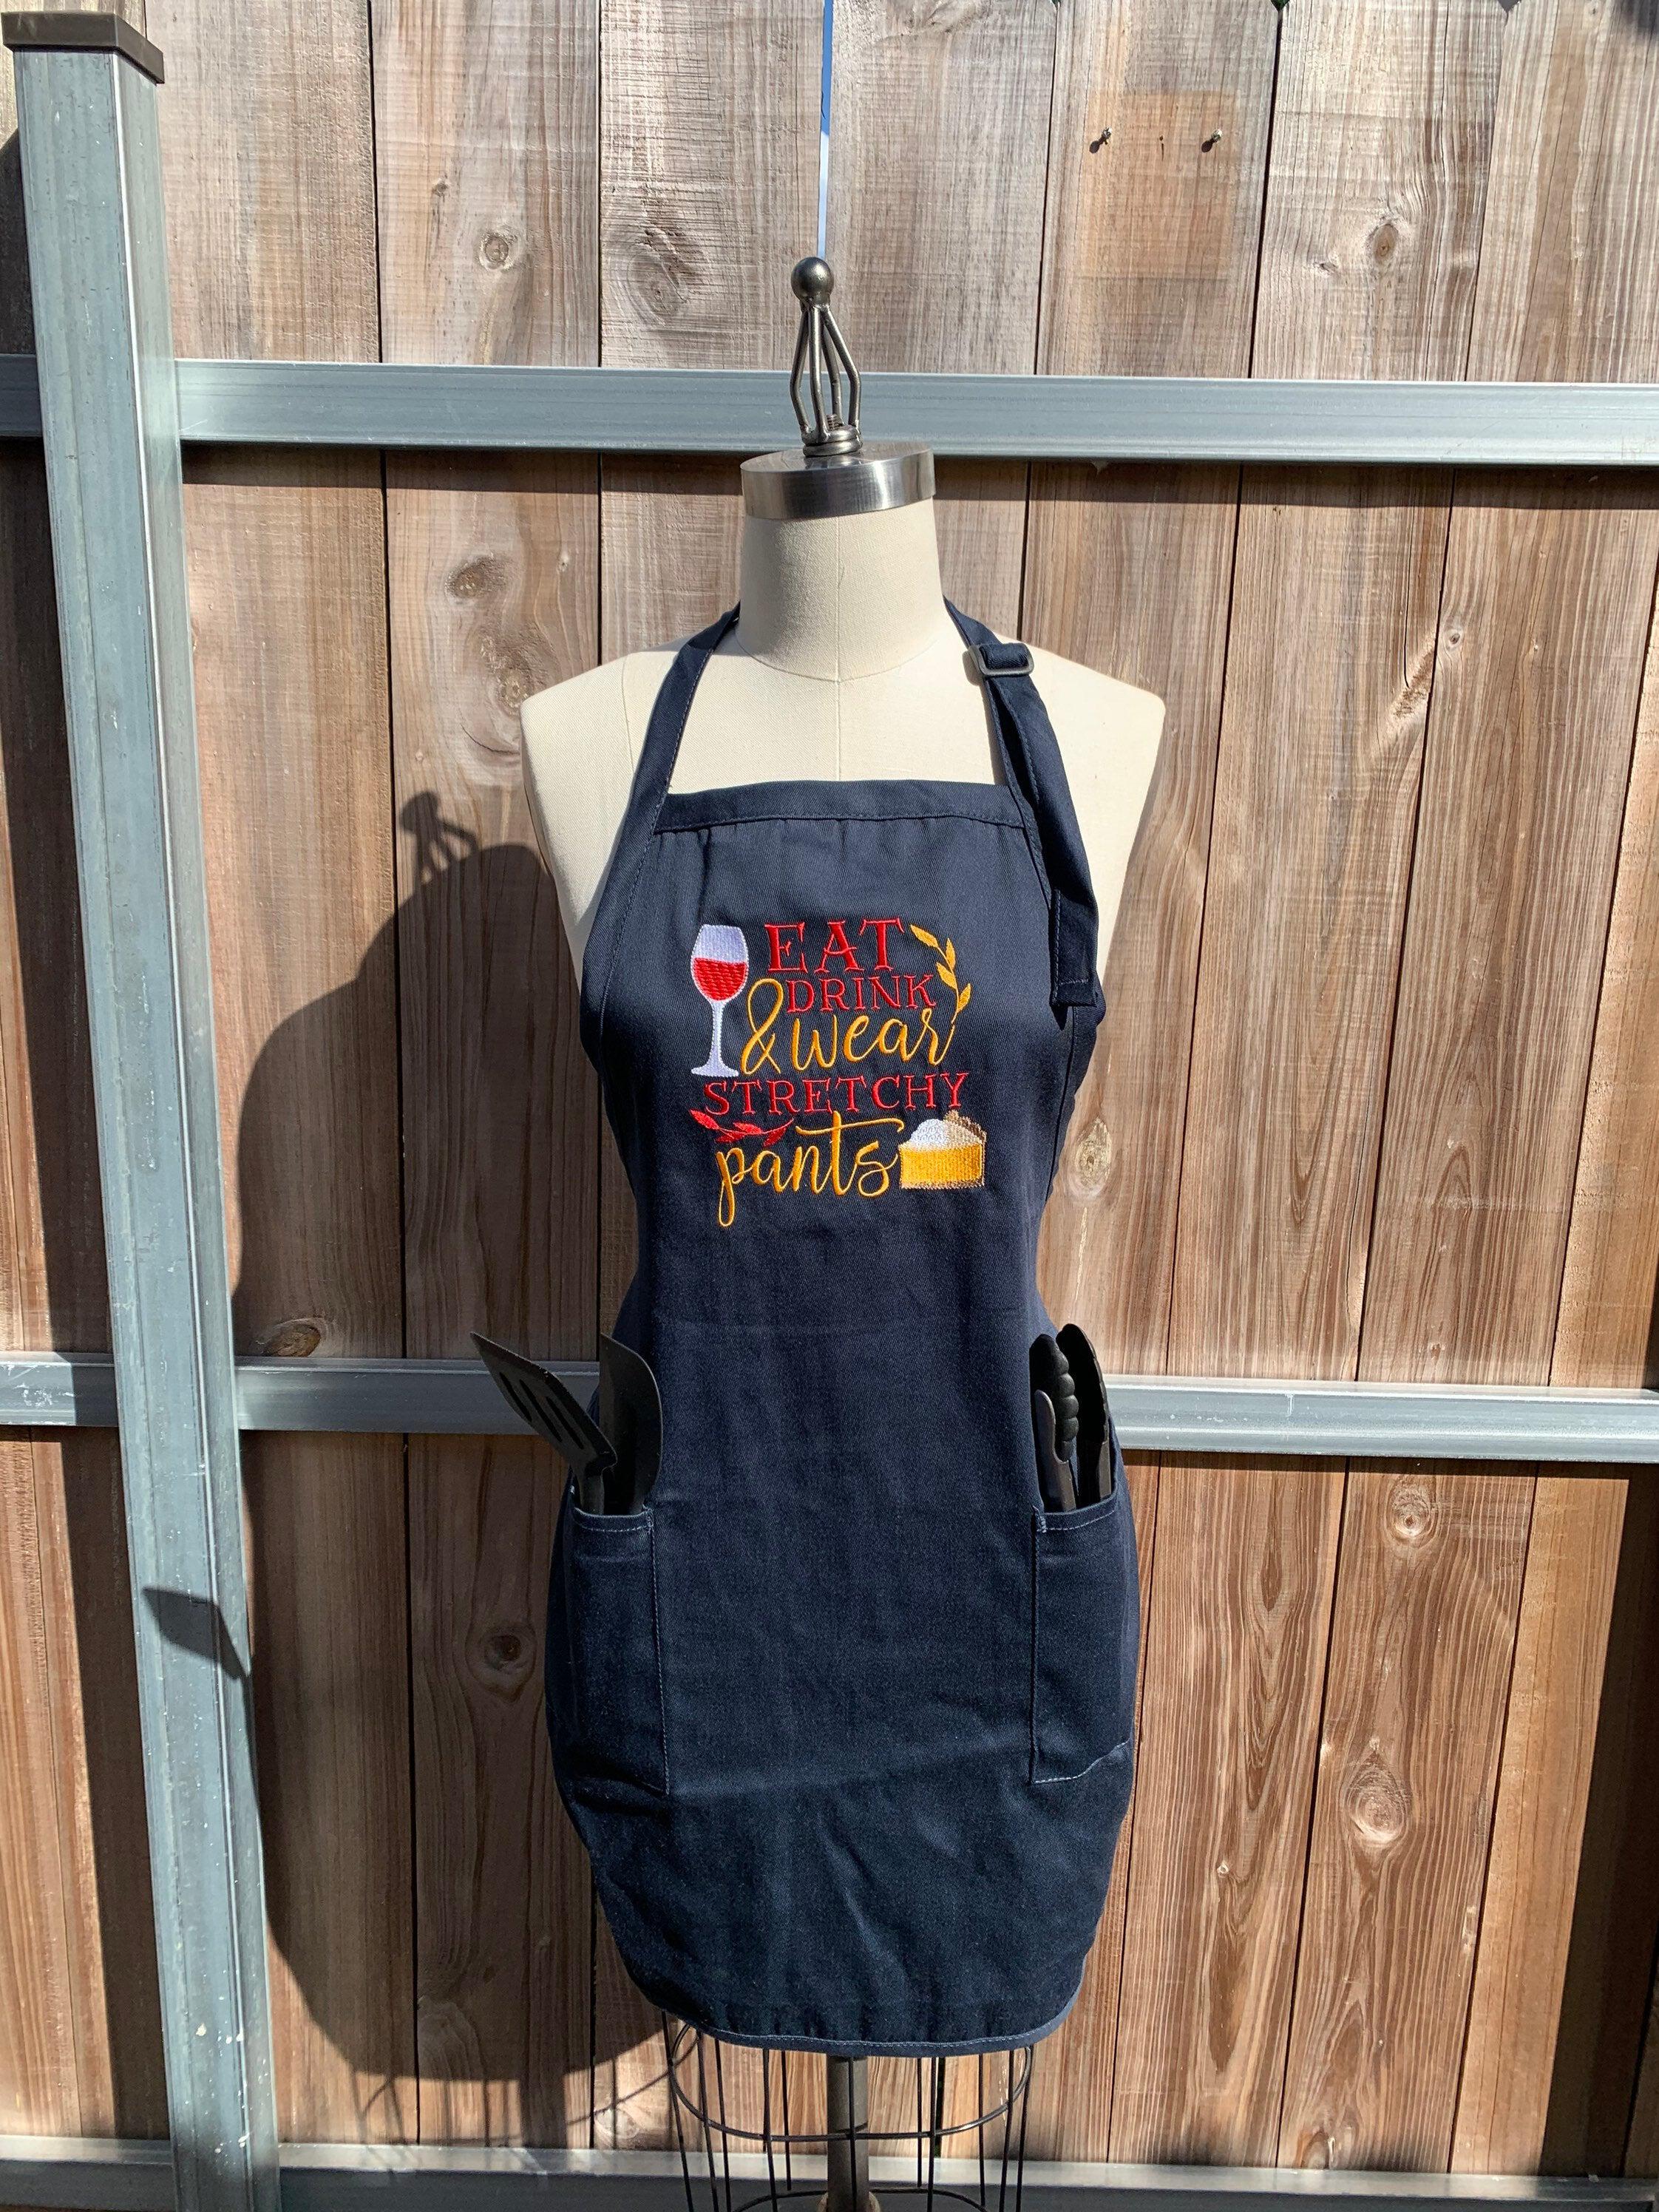 Personalized Apron, Custom Aprons for Women, Gift for Chef, Hostess Gift,  Cooking Apron With Pocket, Aprons Gifts for Mom, Kitchen Gifts 